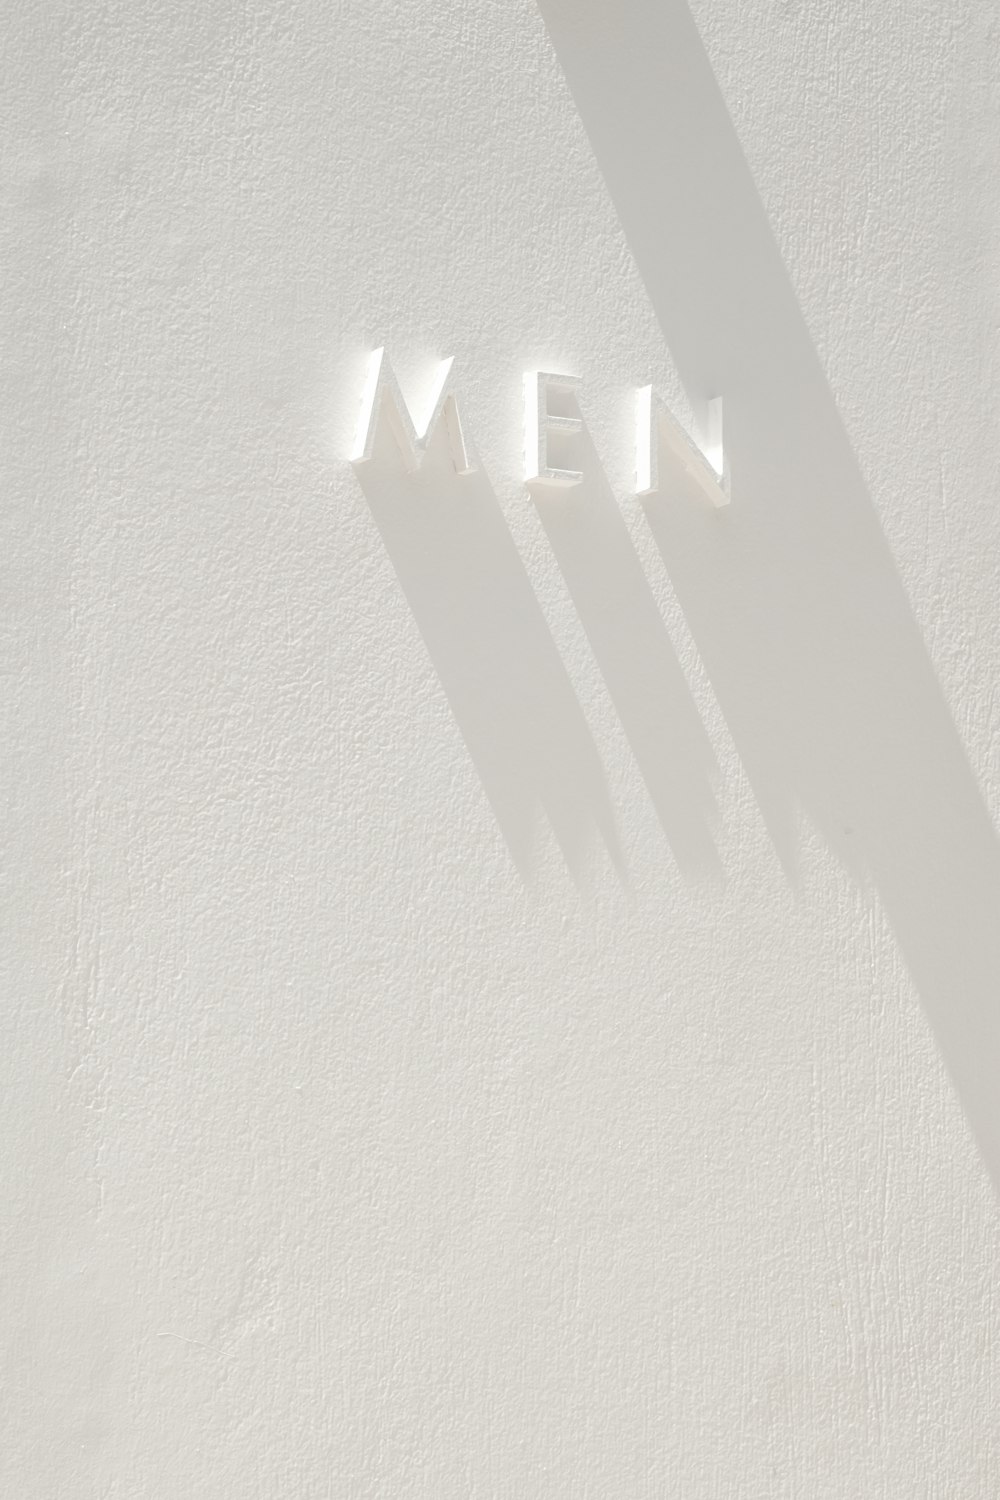 a white wall with the word mean written on it